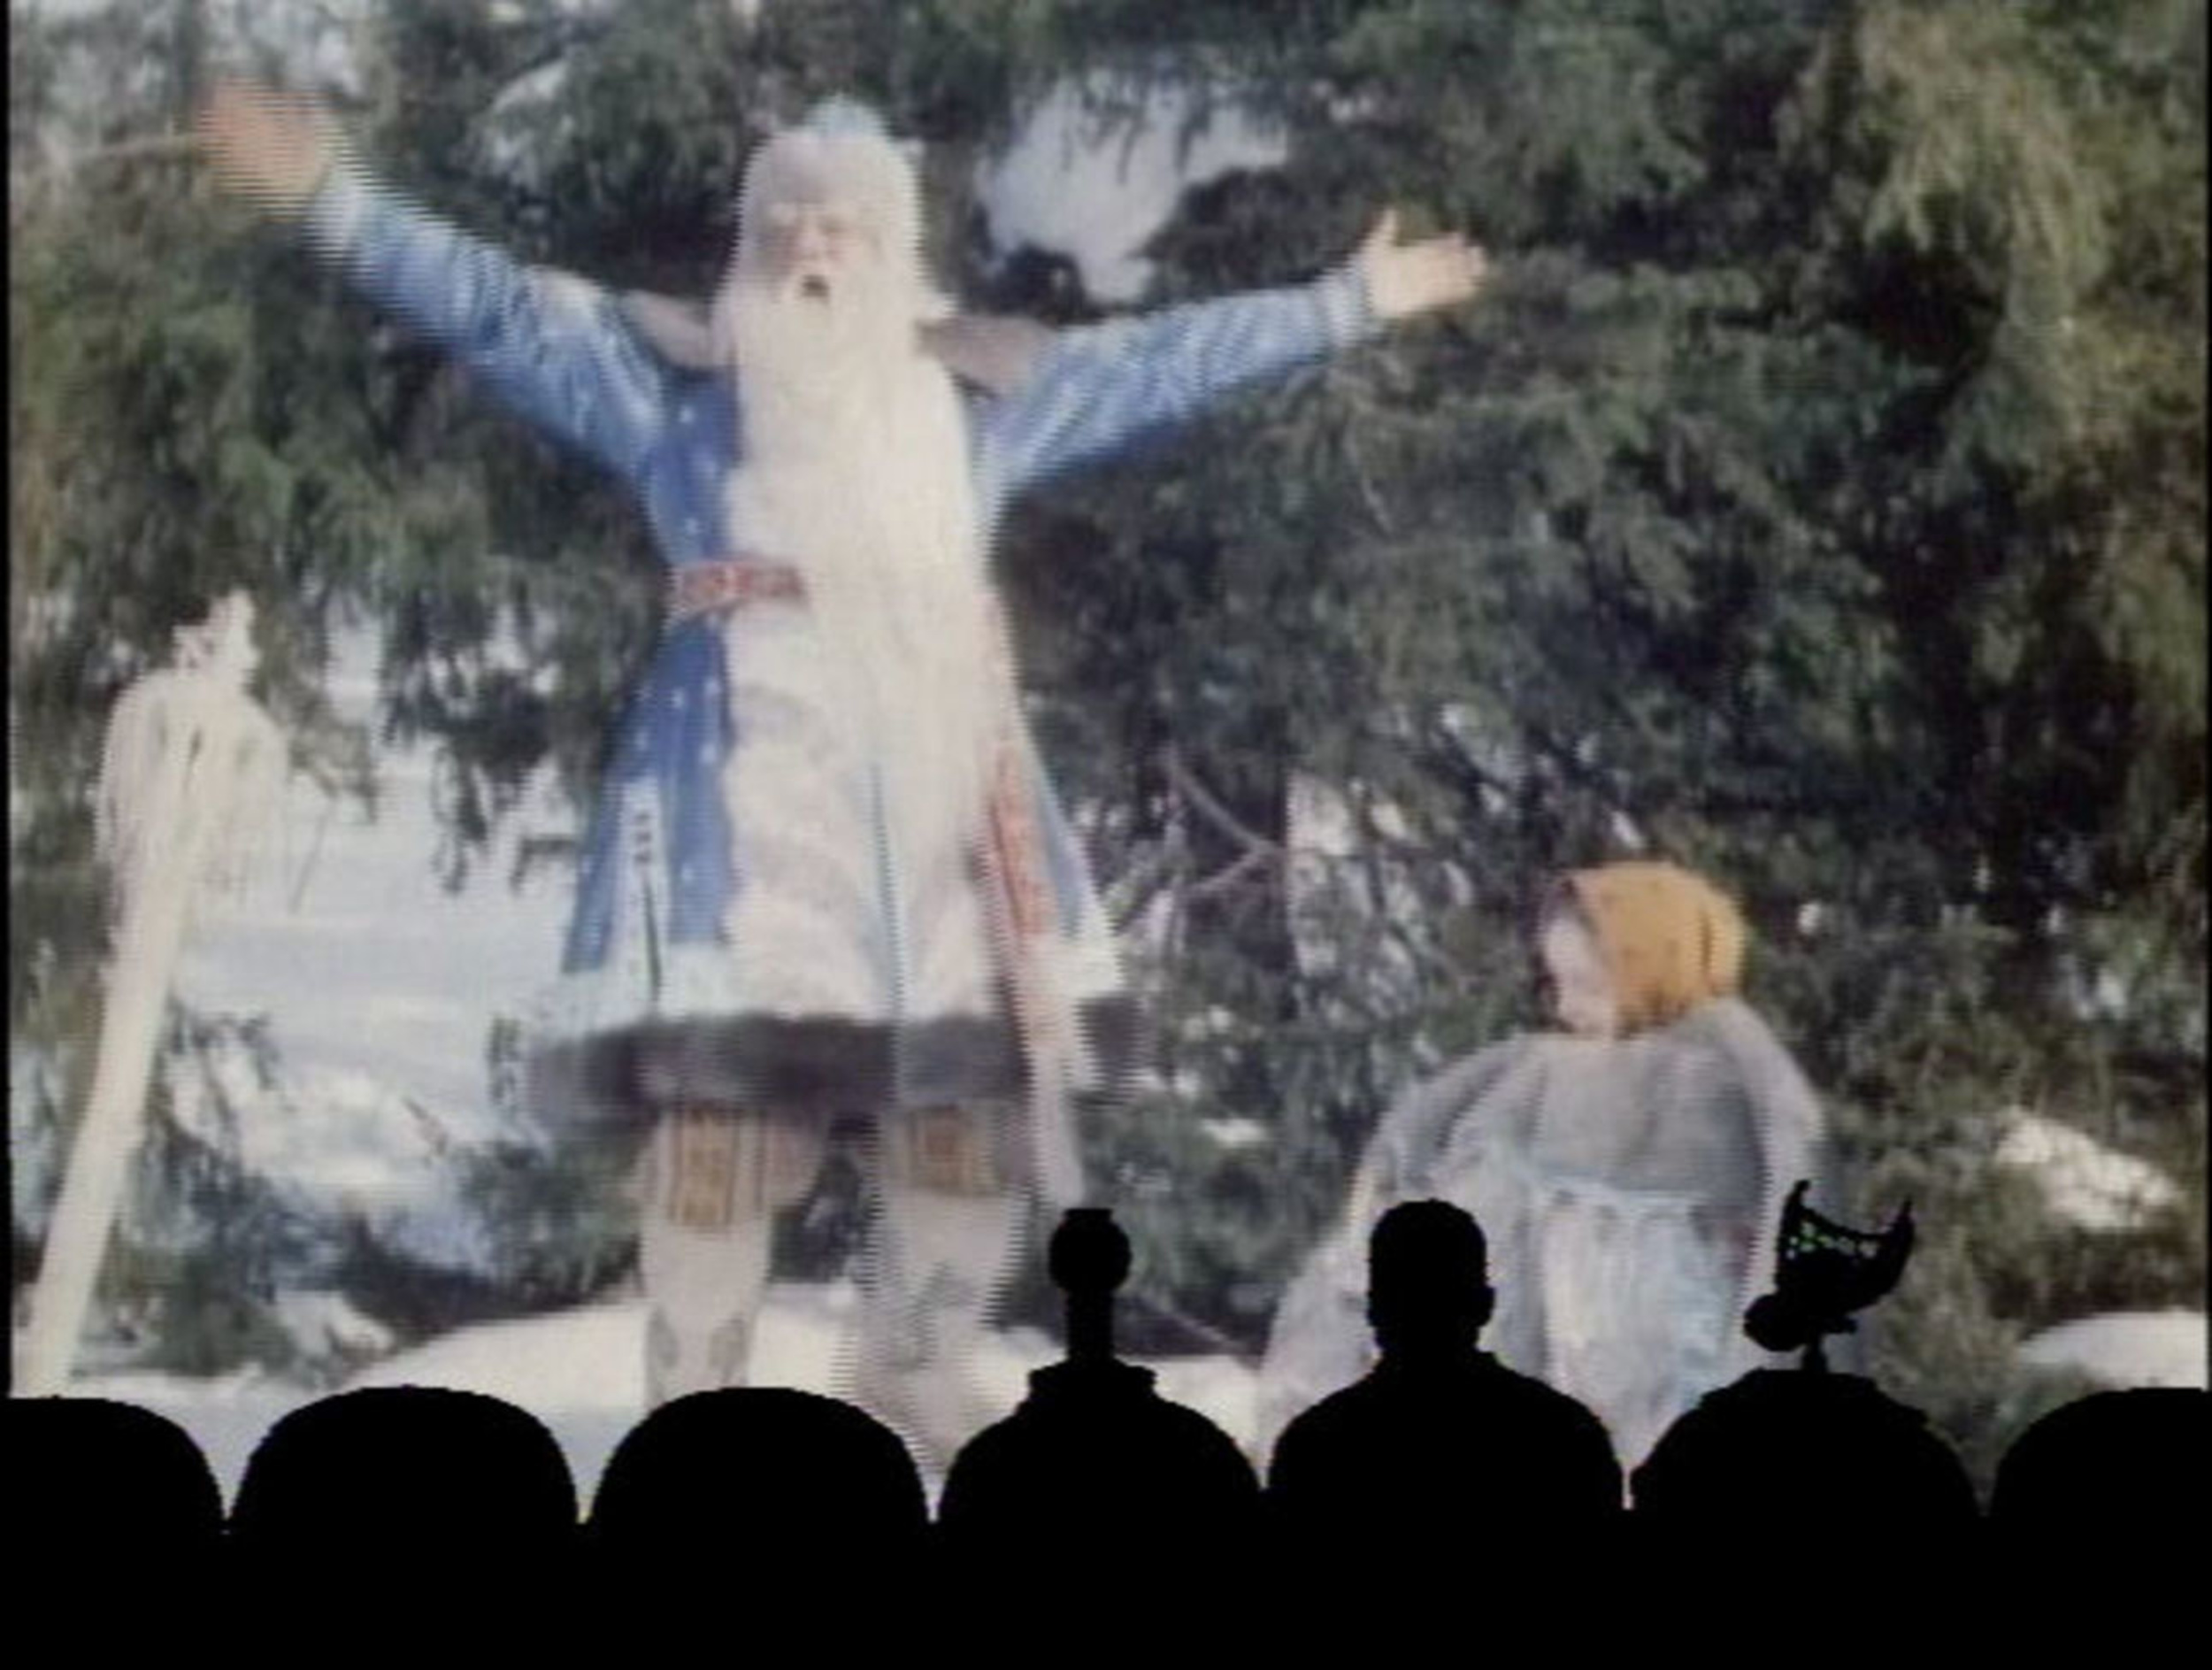 <p>During its run, “MST3K” got its hand on a few Russian/Finnish fable movies with gaudy color palettes. Of course, “Jack Frost” is the best episode, in part because it is the most insane of the films. It’s worth it alone for when the main character gets turned into a bear, and the actor stumbles around with a big, fake bear head on.</p><p><a href='https://www.msn.com/en-us/community/channel/vid-cj9pqbr0vn9in2b6ddcd8sfgpfq6x6utp44fssrv6mc2gtybw0us'>Follow us on MSN to see more of our exclusive entertainment content.</a></p>